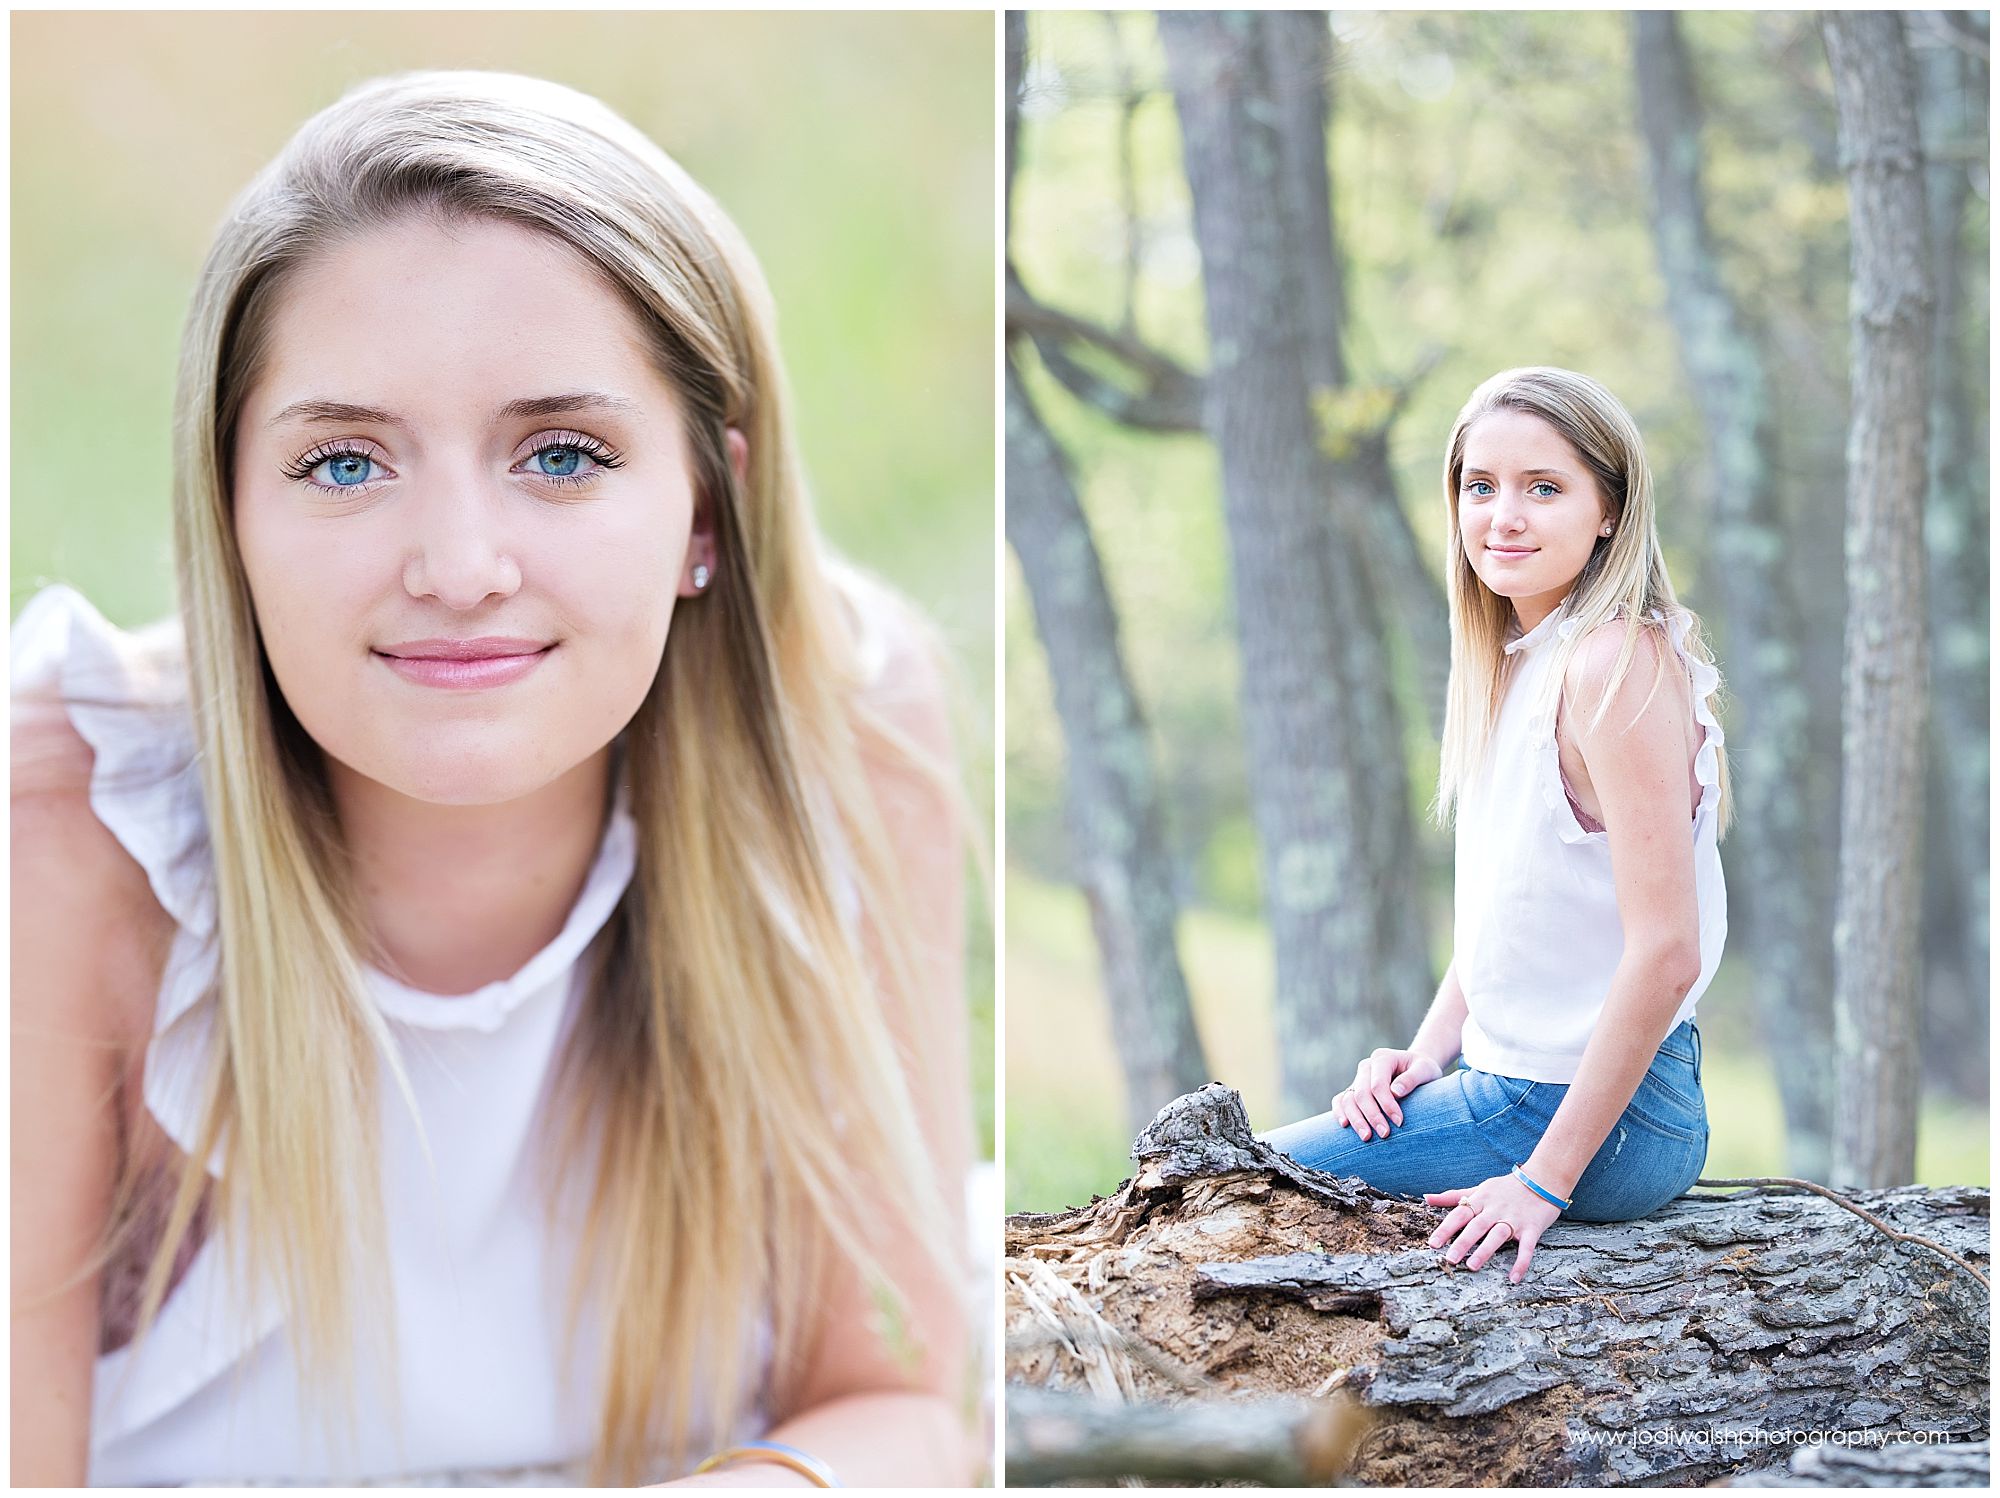 spring senior portrait of blonde with blue eyes in white shirt and bluejeans